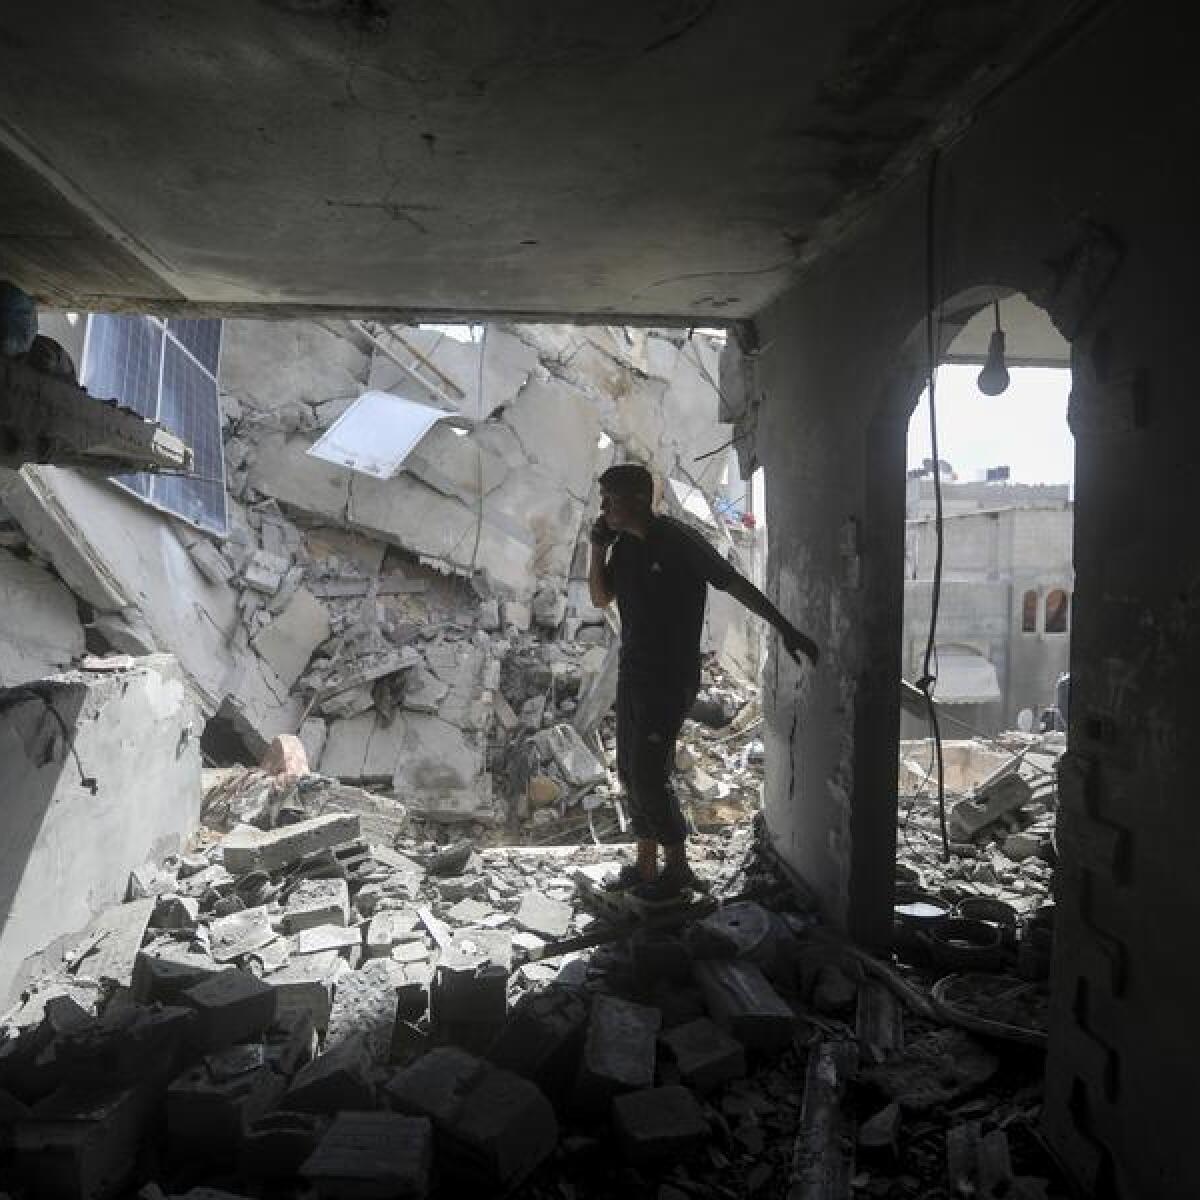 Palestinians look at the destruction after an Israeli strike in Gaza.